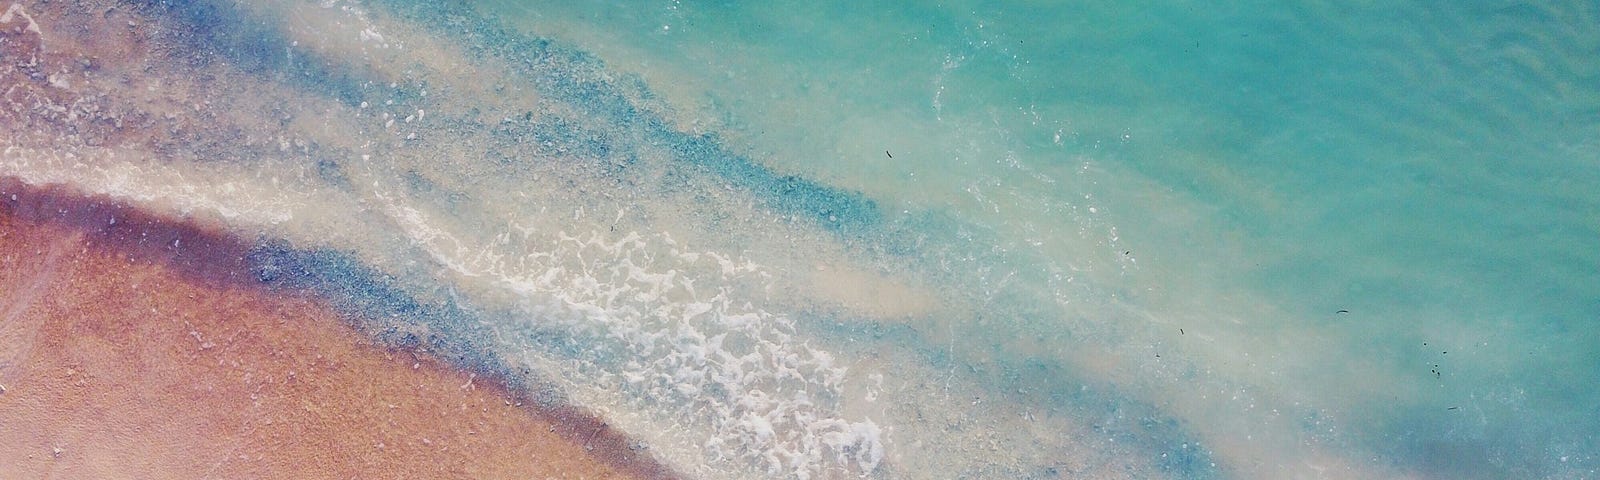 A pale turquoise sea crashes against a beach of peachy pink